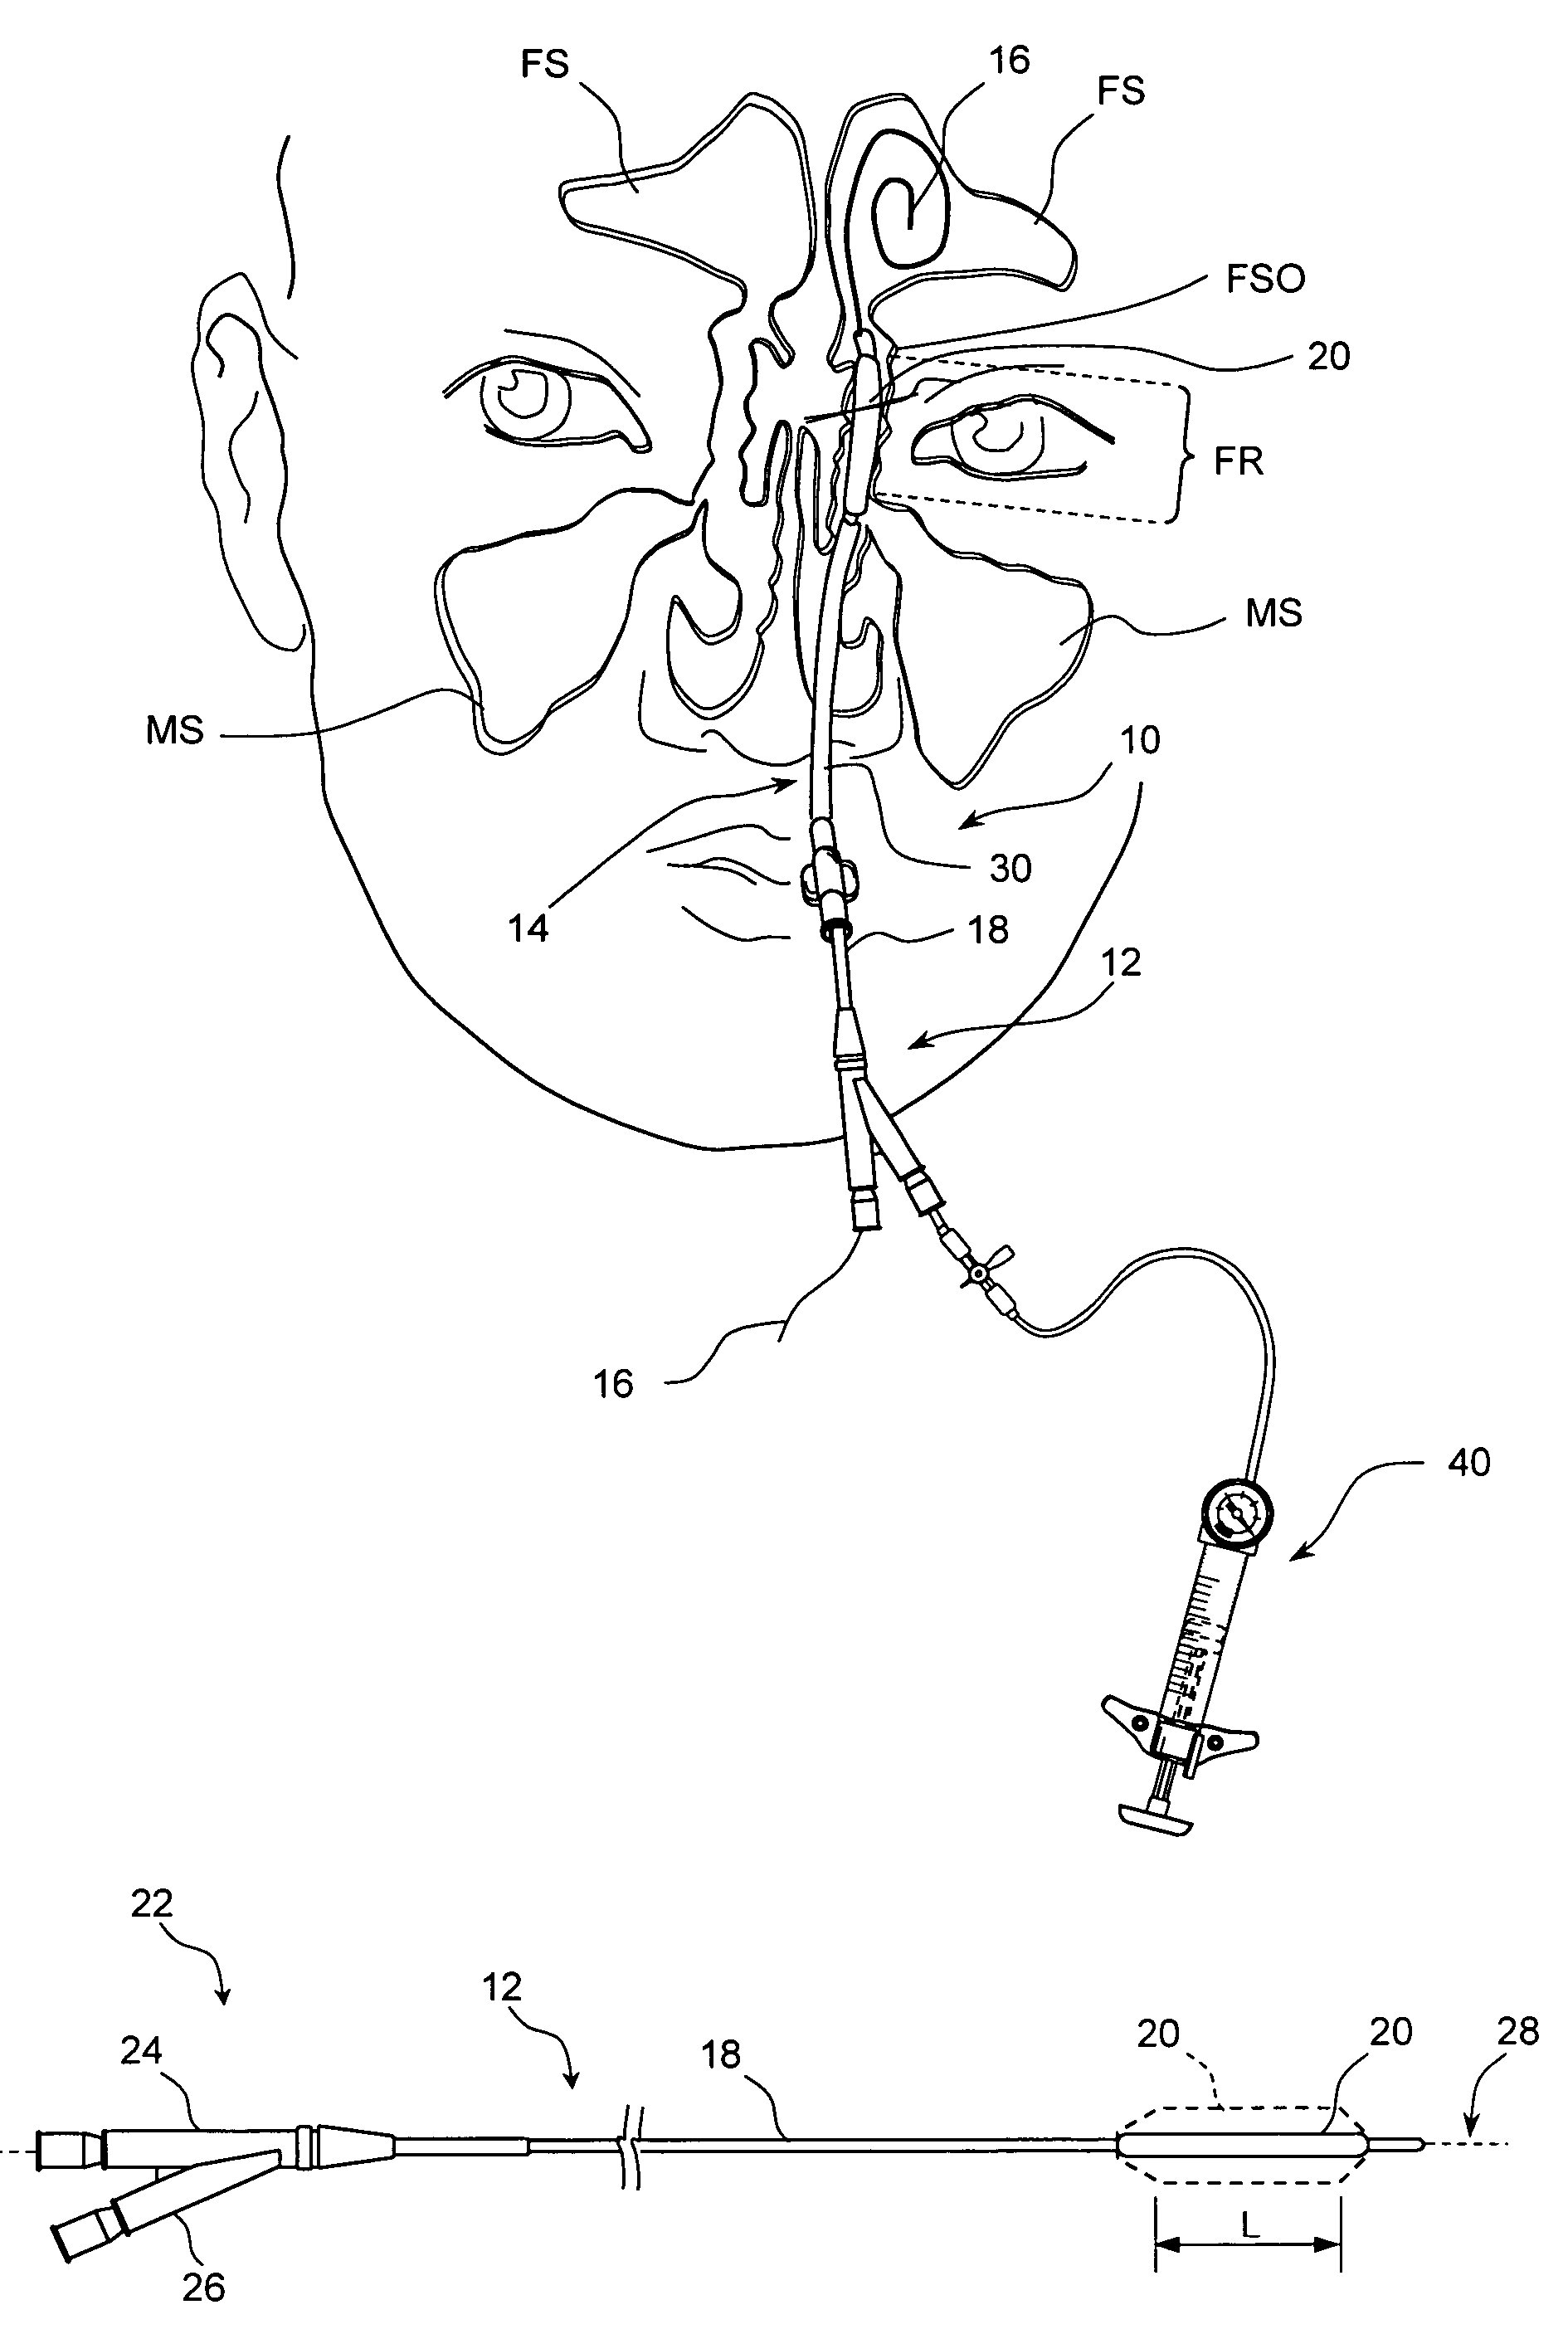 Devices, systems and methods useable for treating frontal sinusitis